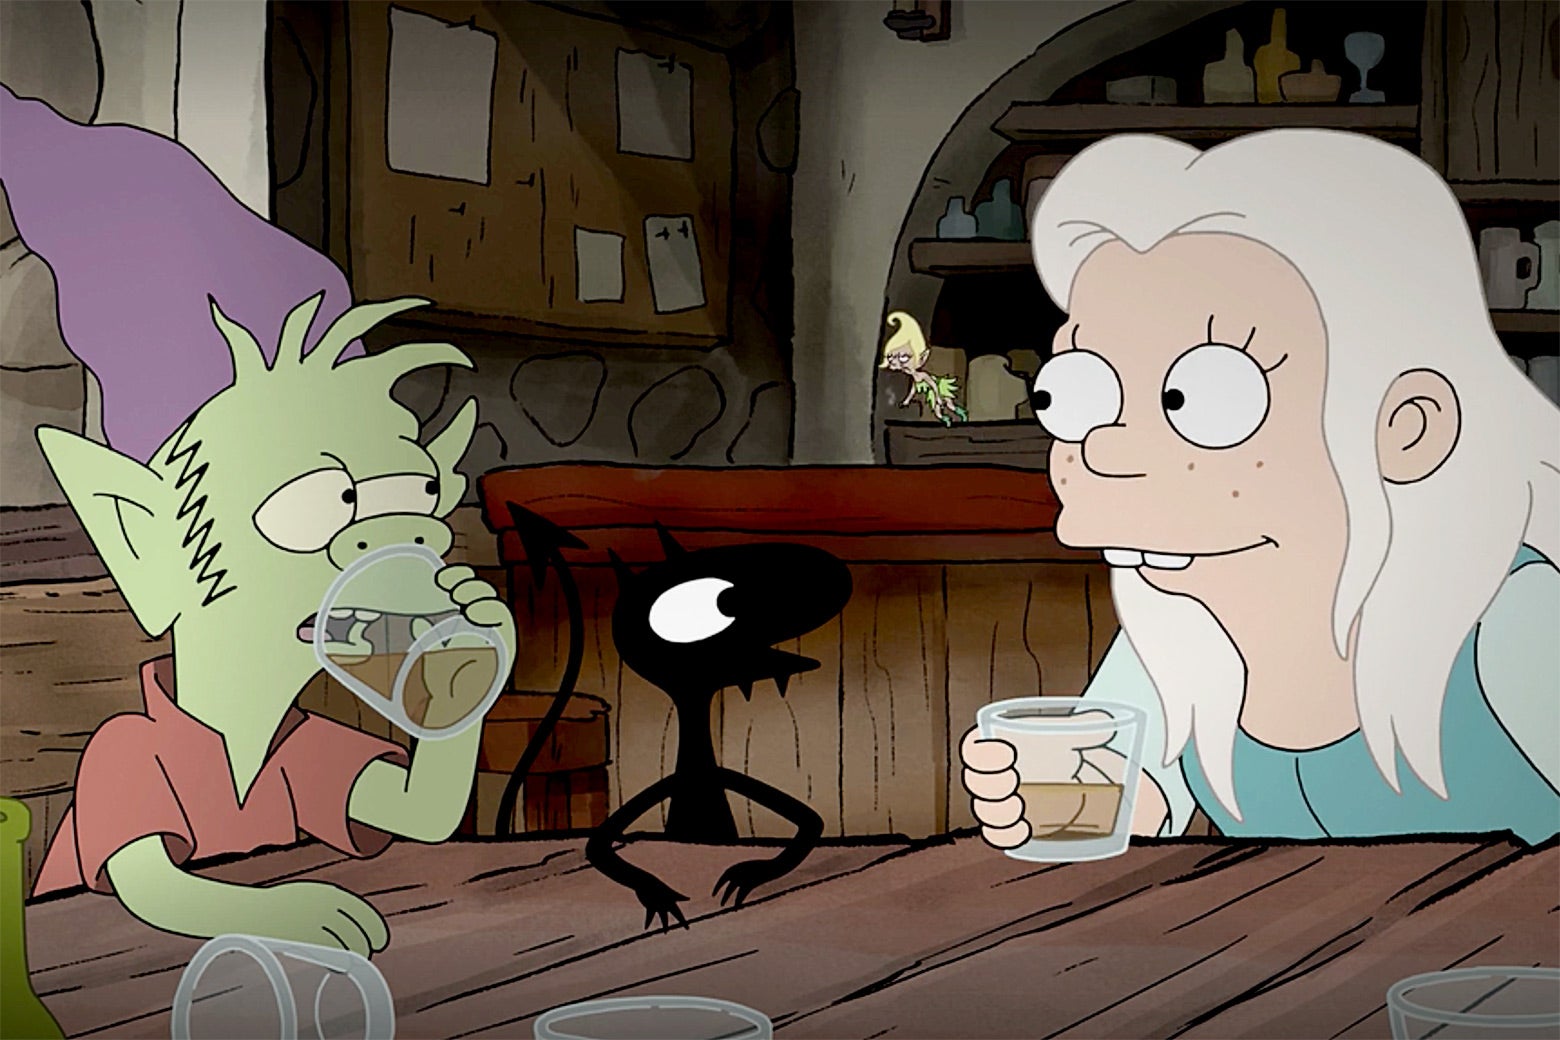 In a scene from Matt Groening's Disenchantment, Bean (Abbi Jacobson) shares a drink with her companions Elfo (Nat Faxon) and Luci (Eric André).